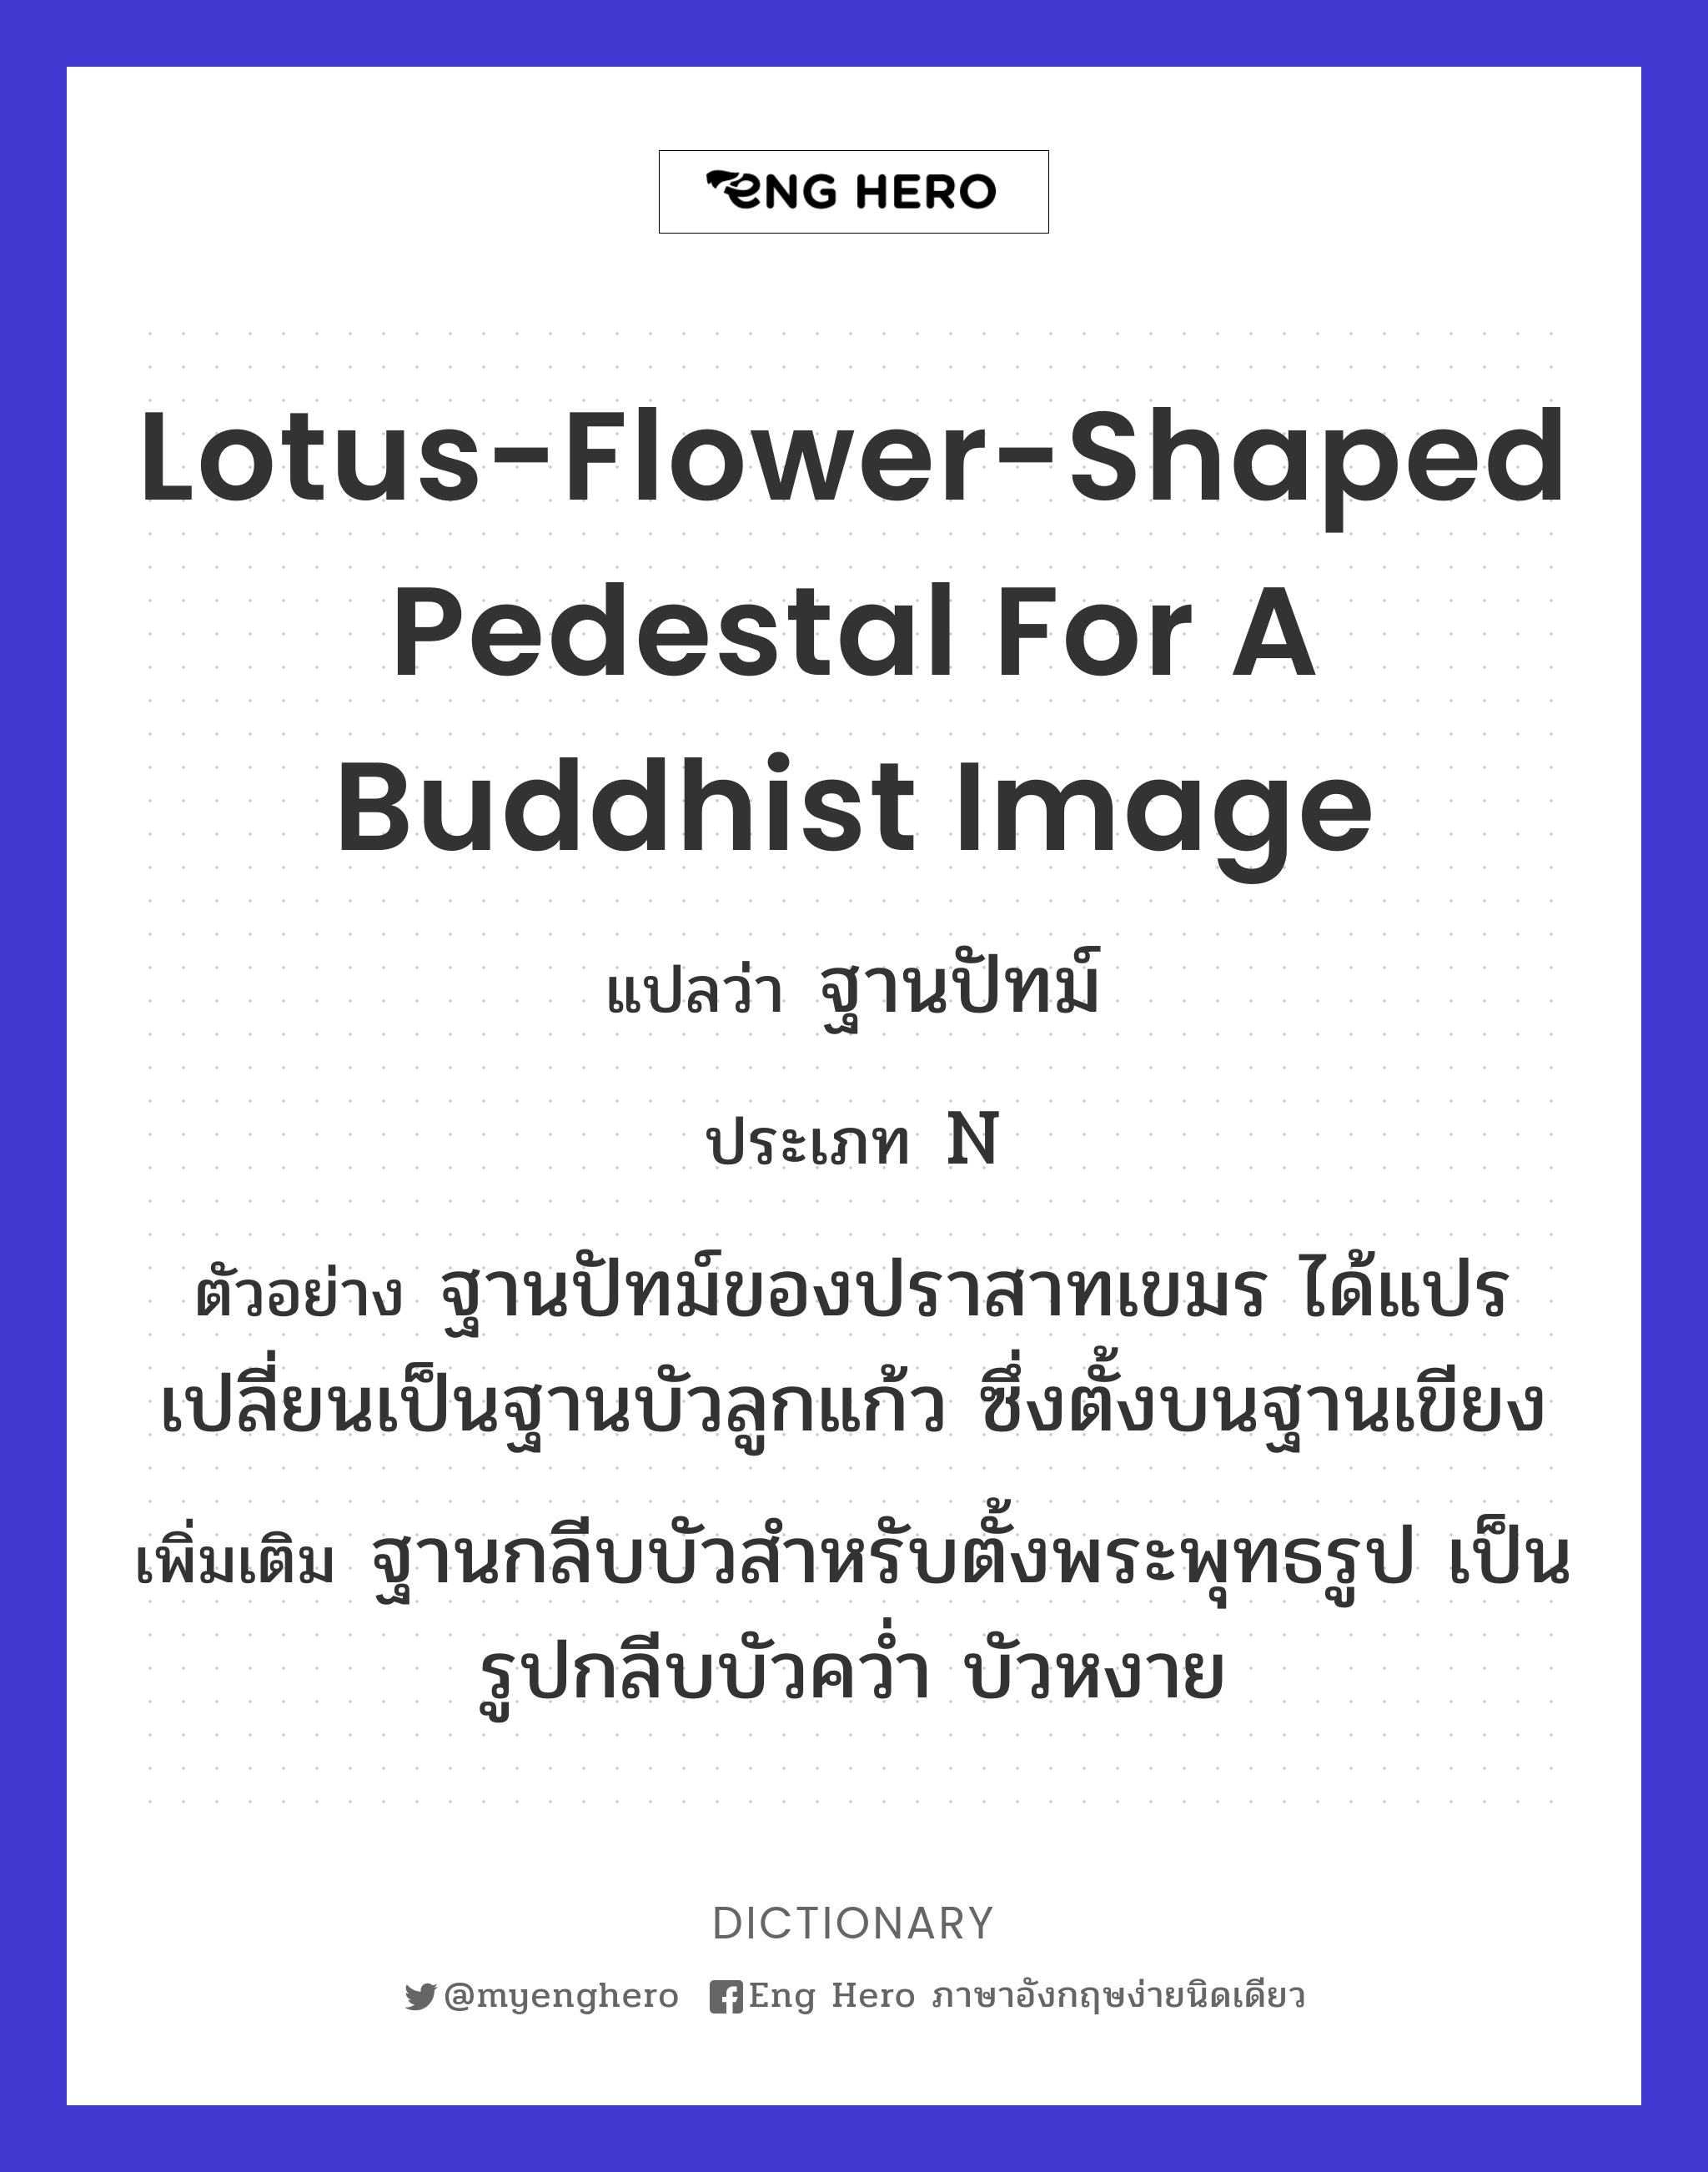 lotus-flower-shaped pedestal for a Buddhist image